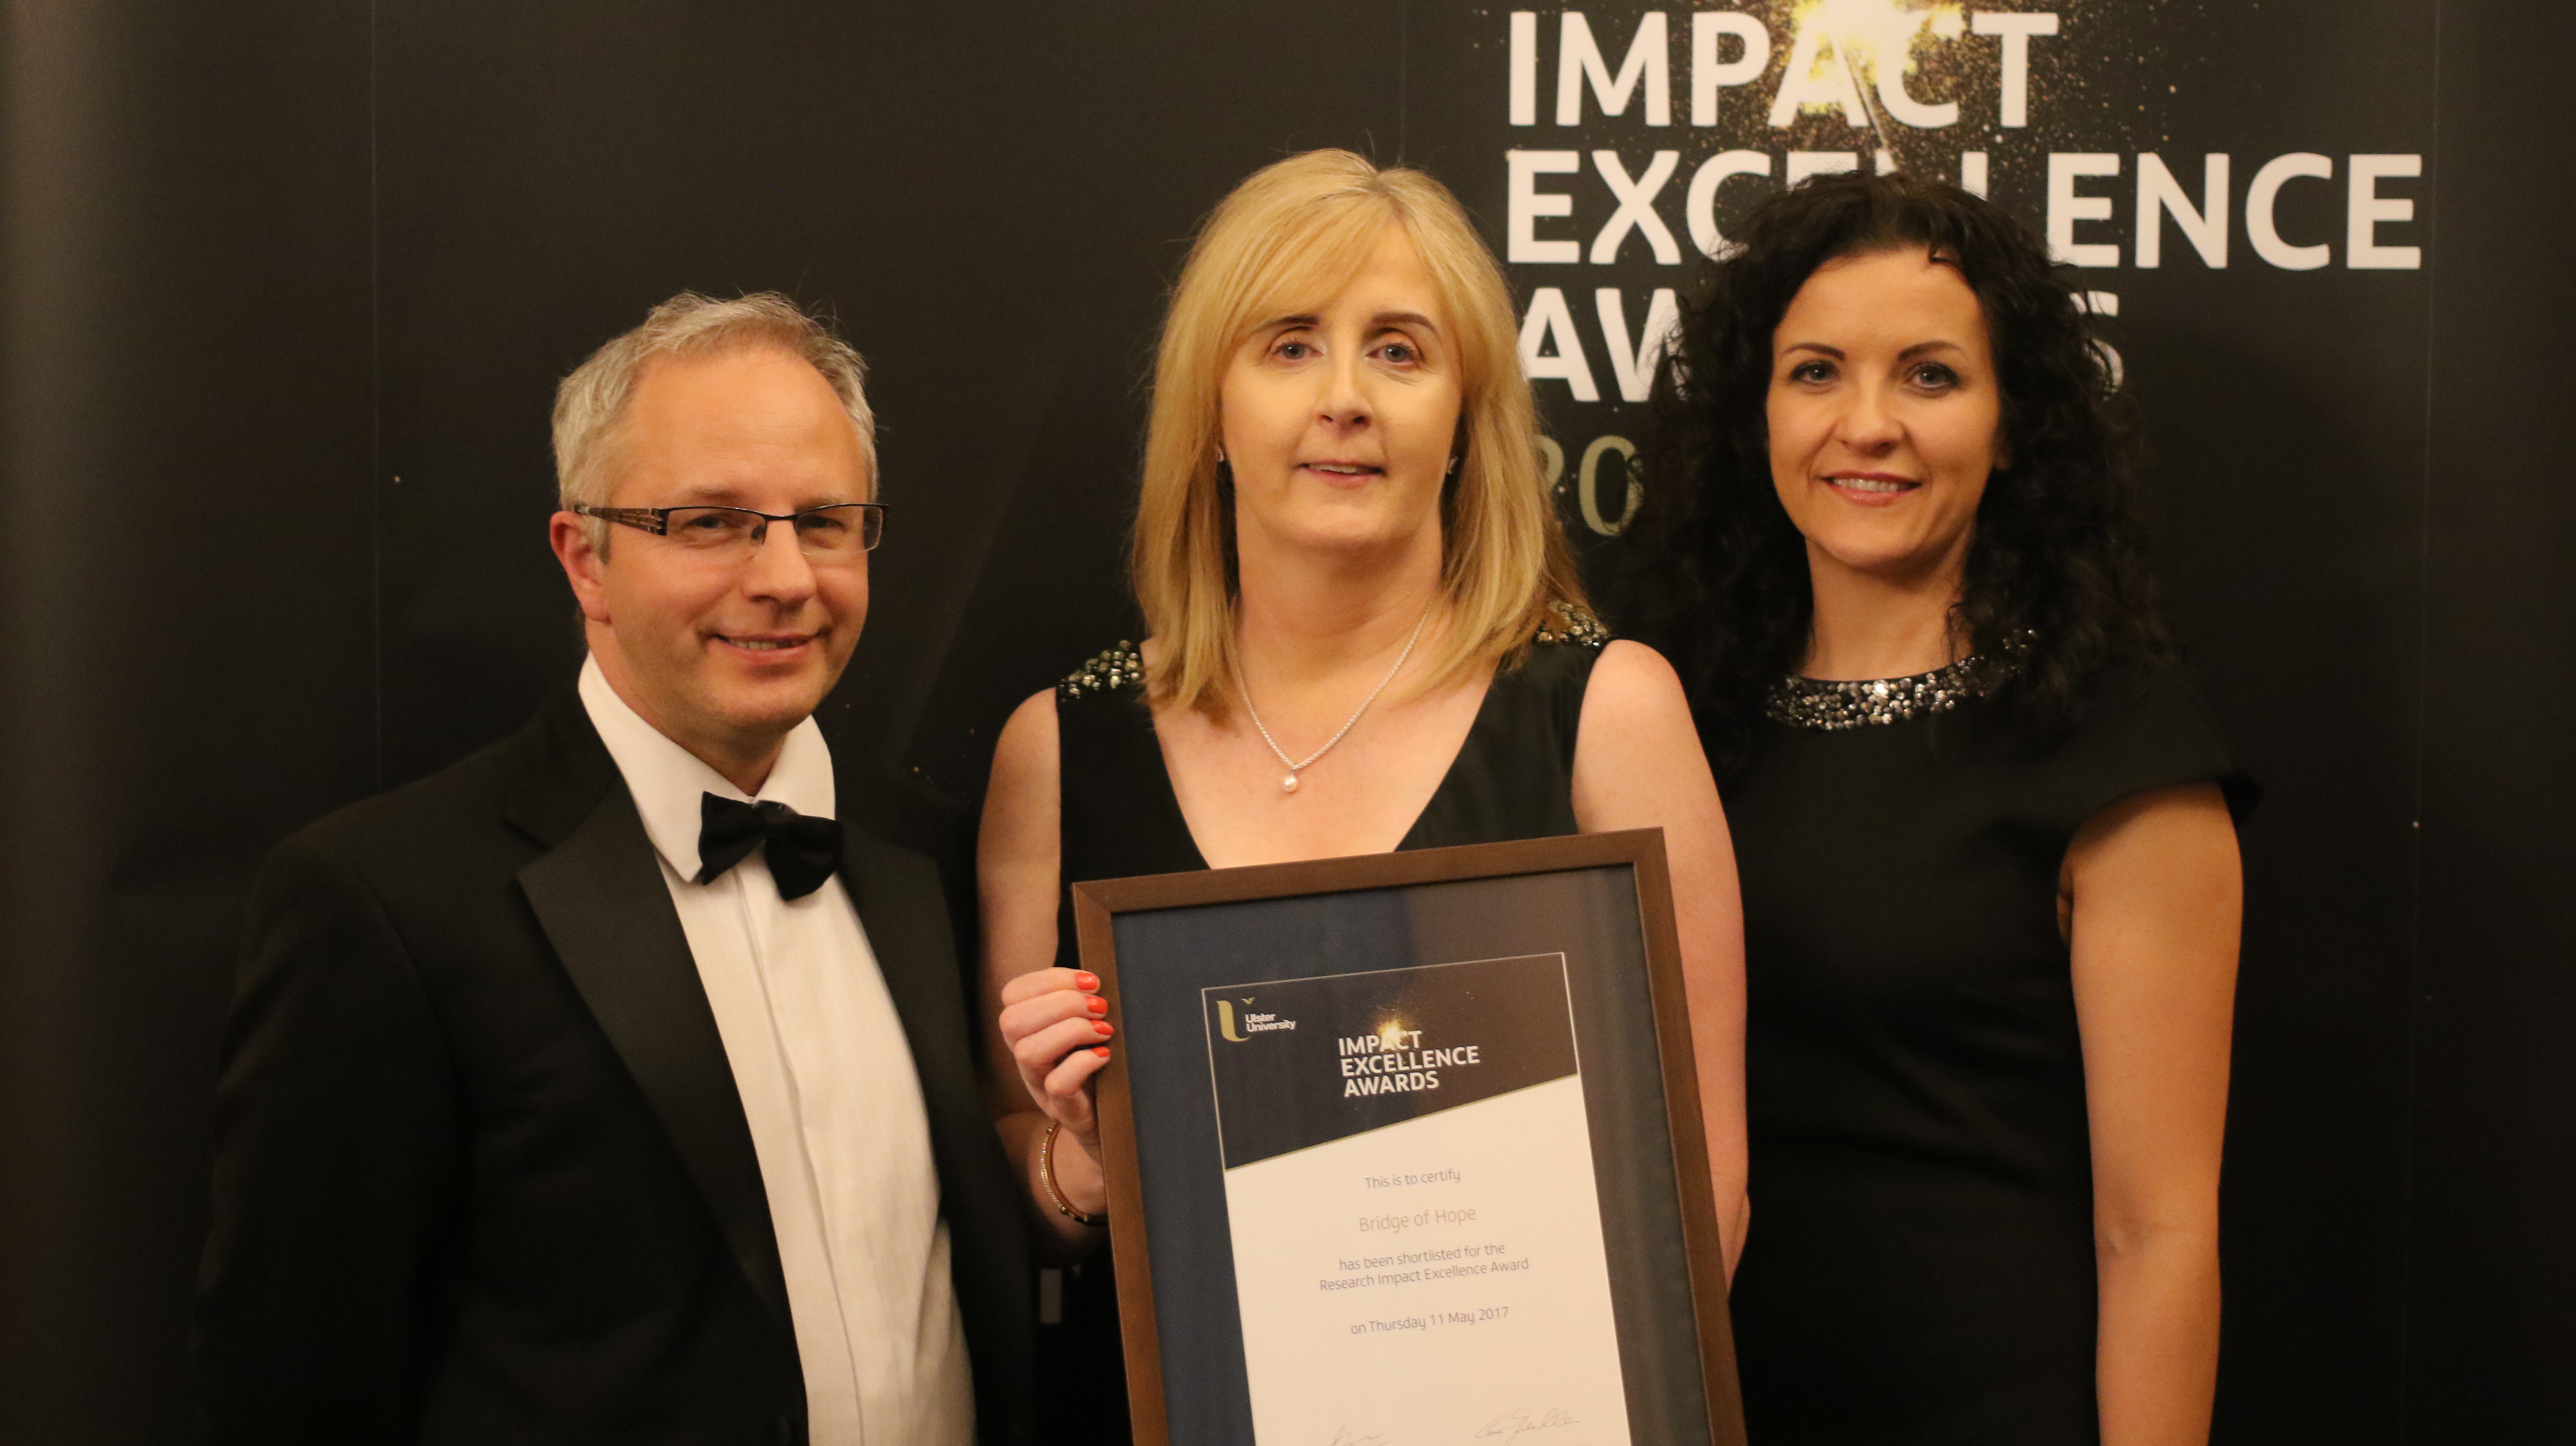 Ulster University Impact Excellence Awards 2017 at Belfast Harbour Commission. TJI Director Rory O'Connell, ACT Head of victims & Mental Health Services Irene Sherry & TJI Research Manager Lisa Thompson. Bridge of Hope was shortlisted for its partnership work with TJI on the Grassroots Toolkit.